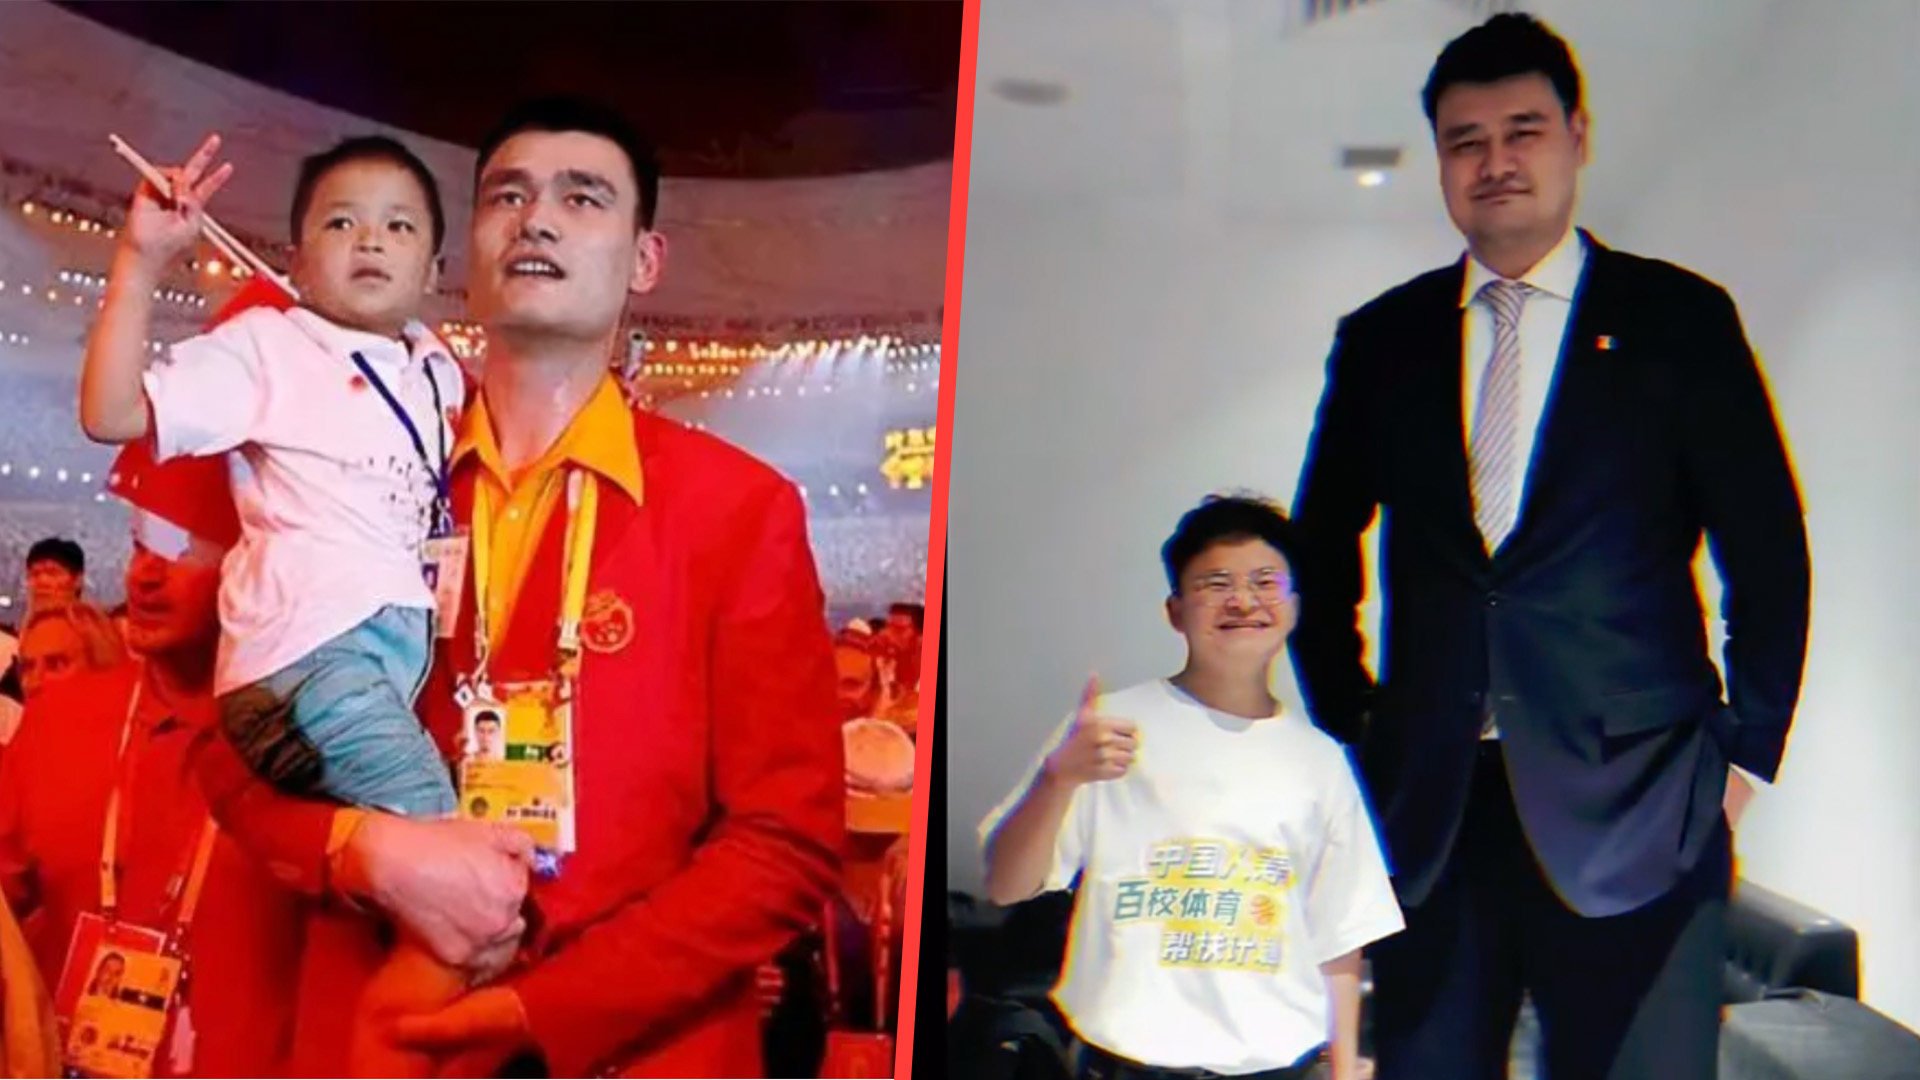 A reunion to remember took place earlier this month when a now grown up, boy-hero of the deadly 2008 Sichuan earthquake was reunited with Chinese basketball legend, Yao Ming, 16 years after the pair led China’s team at the opening parade of the Beijing Olympics. Photo: SCMP composite/Douyin/Zhihu